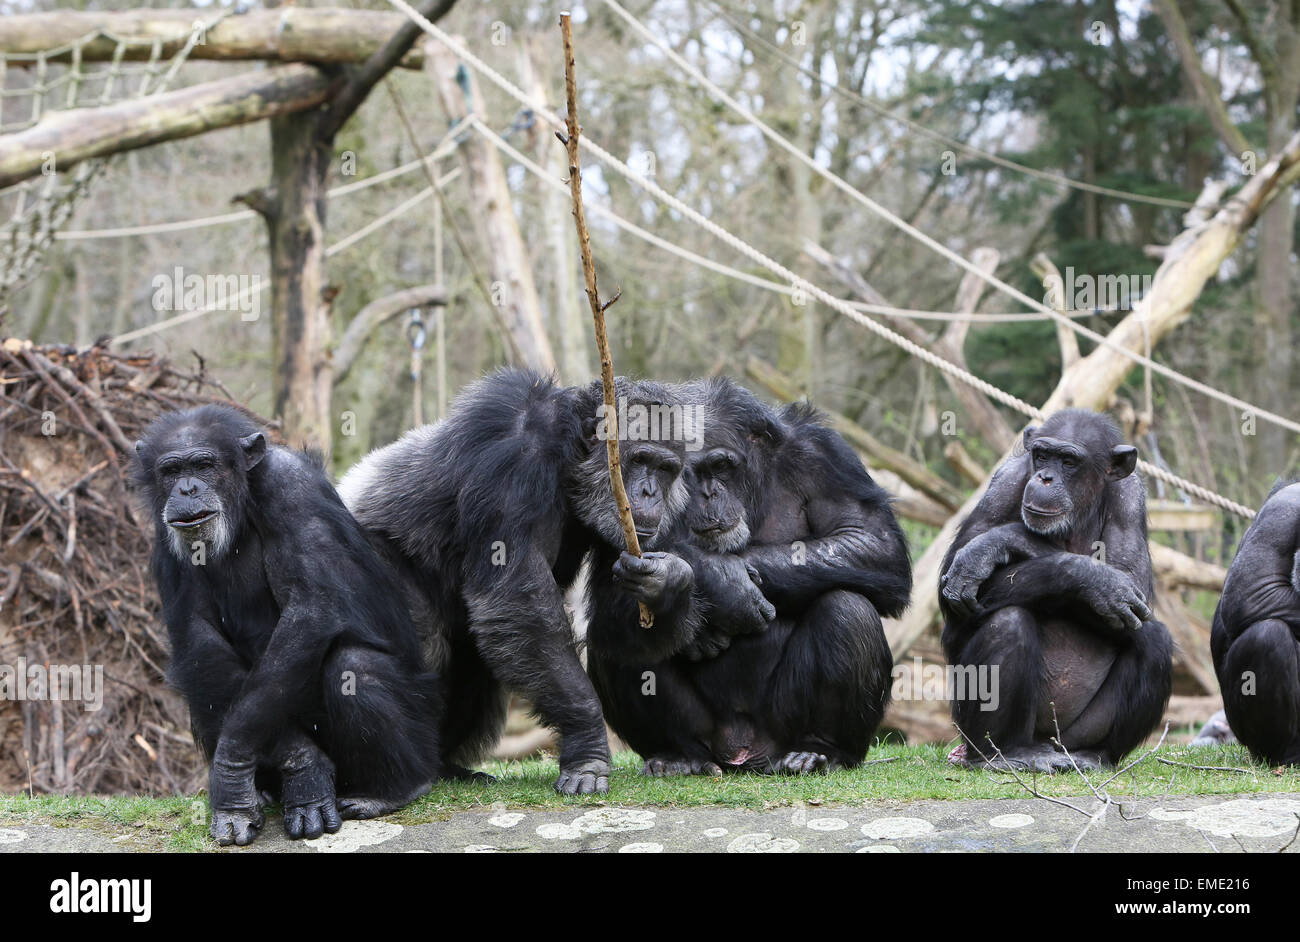 The chimpanzees of Burgers' Zoo use sticks to fish for bananas on a clothesline and apples in the water in Arnhem, the Netherlands, 17 April 2015. Earlier this week, a female chimpanzee named Tushi hit a drone with a stick. The video was publicised on hundreds of news media websites worldwide, including CNN and NBC, and has now tens of millions of views. Photo: VidiPhoto dpa - - NO WIRE SERVICE - Stock Photo